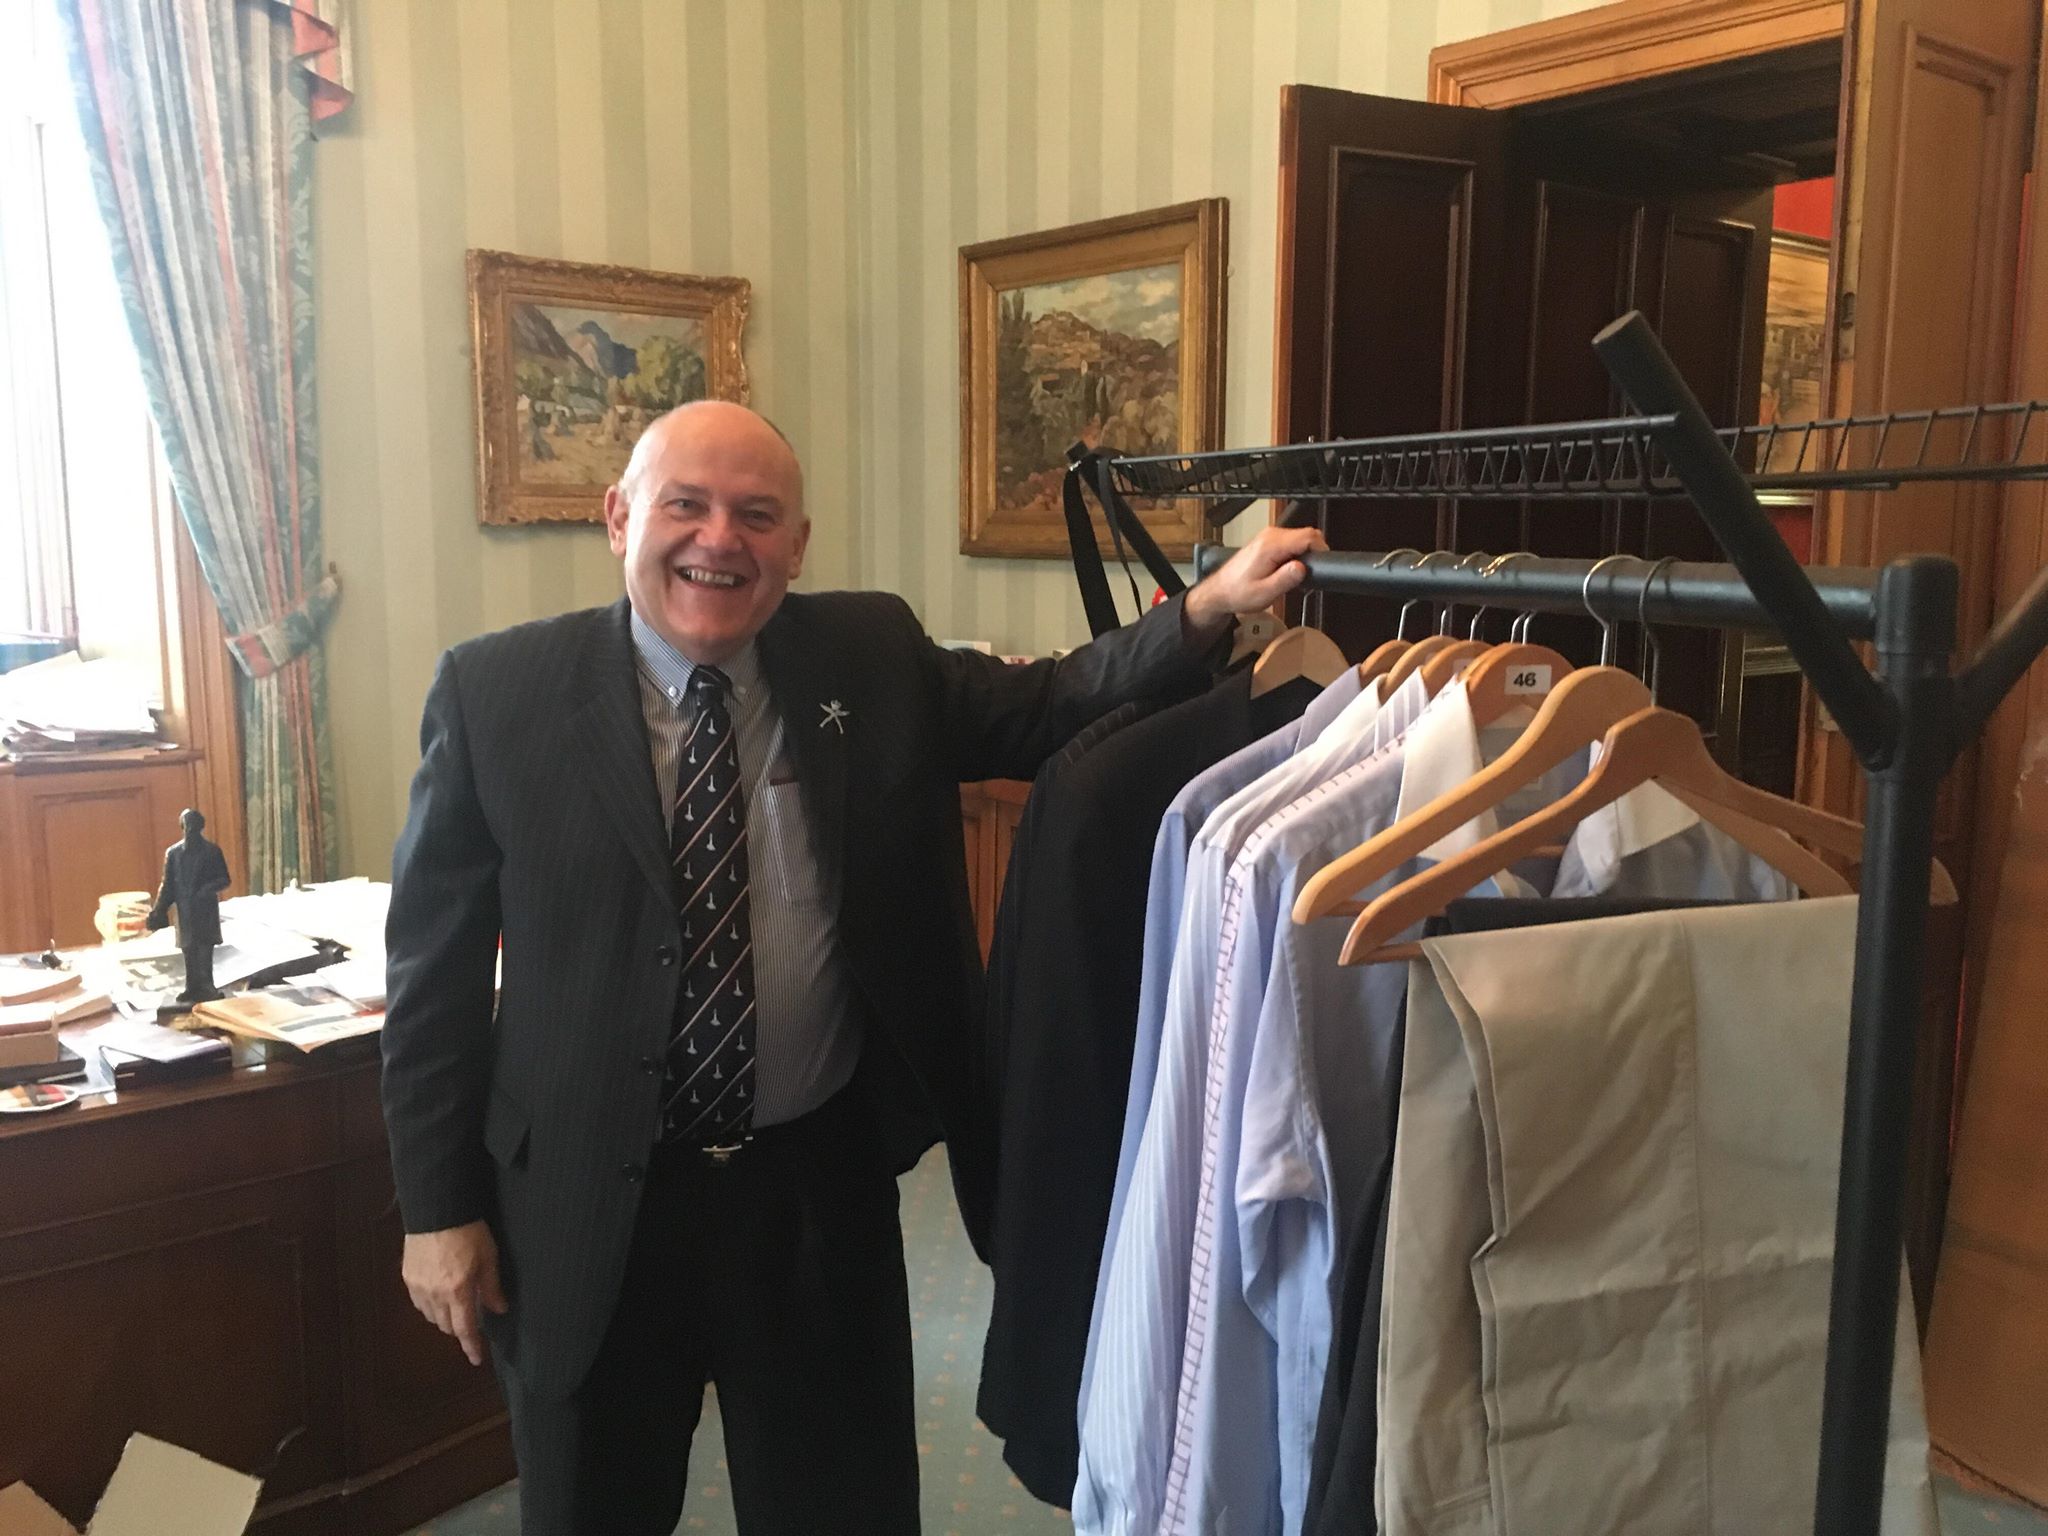 The Lord Provost with some of the new items